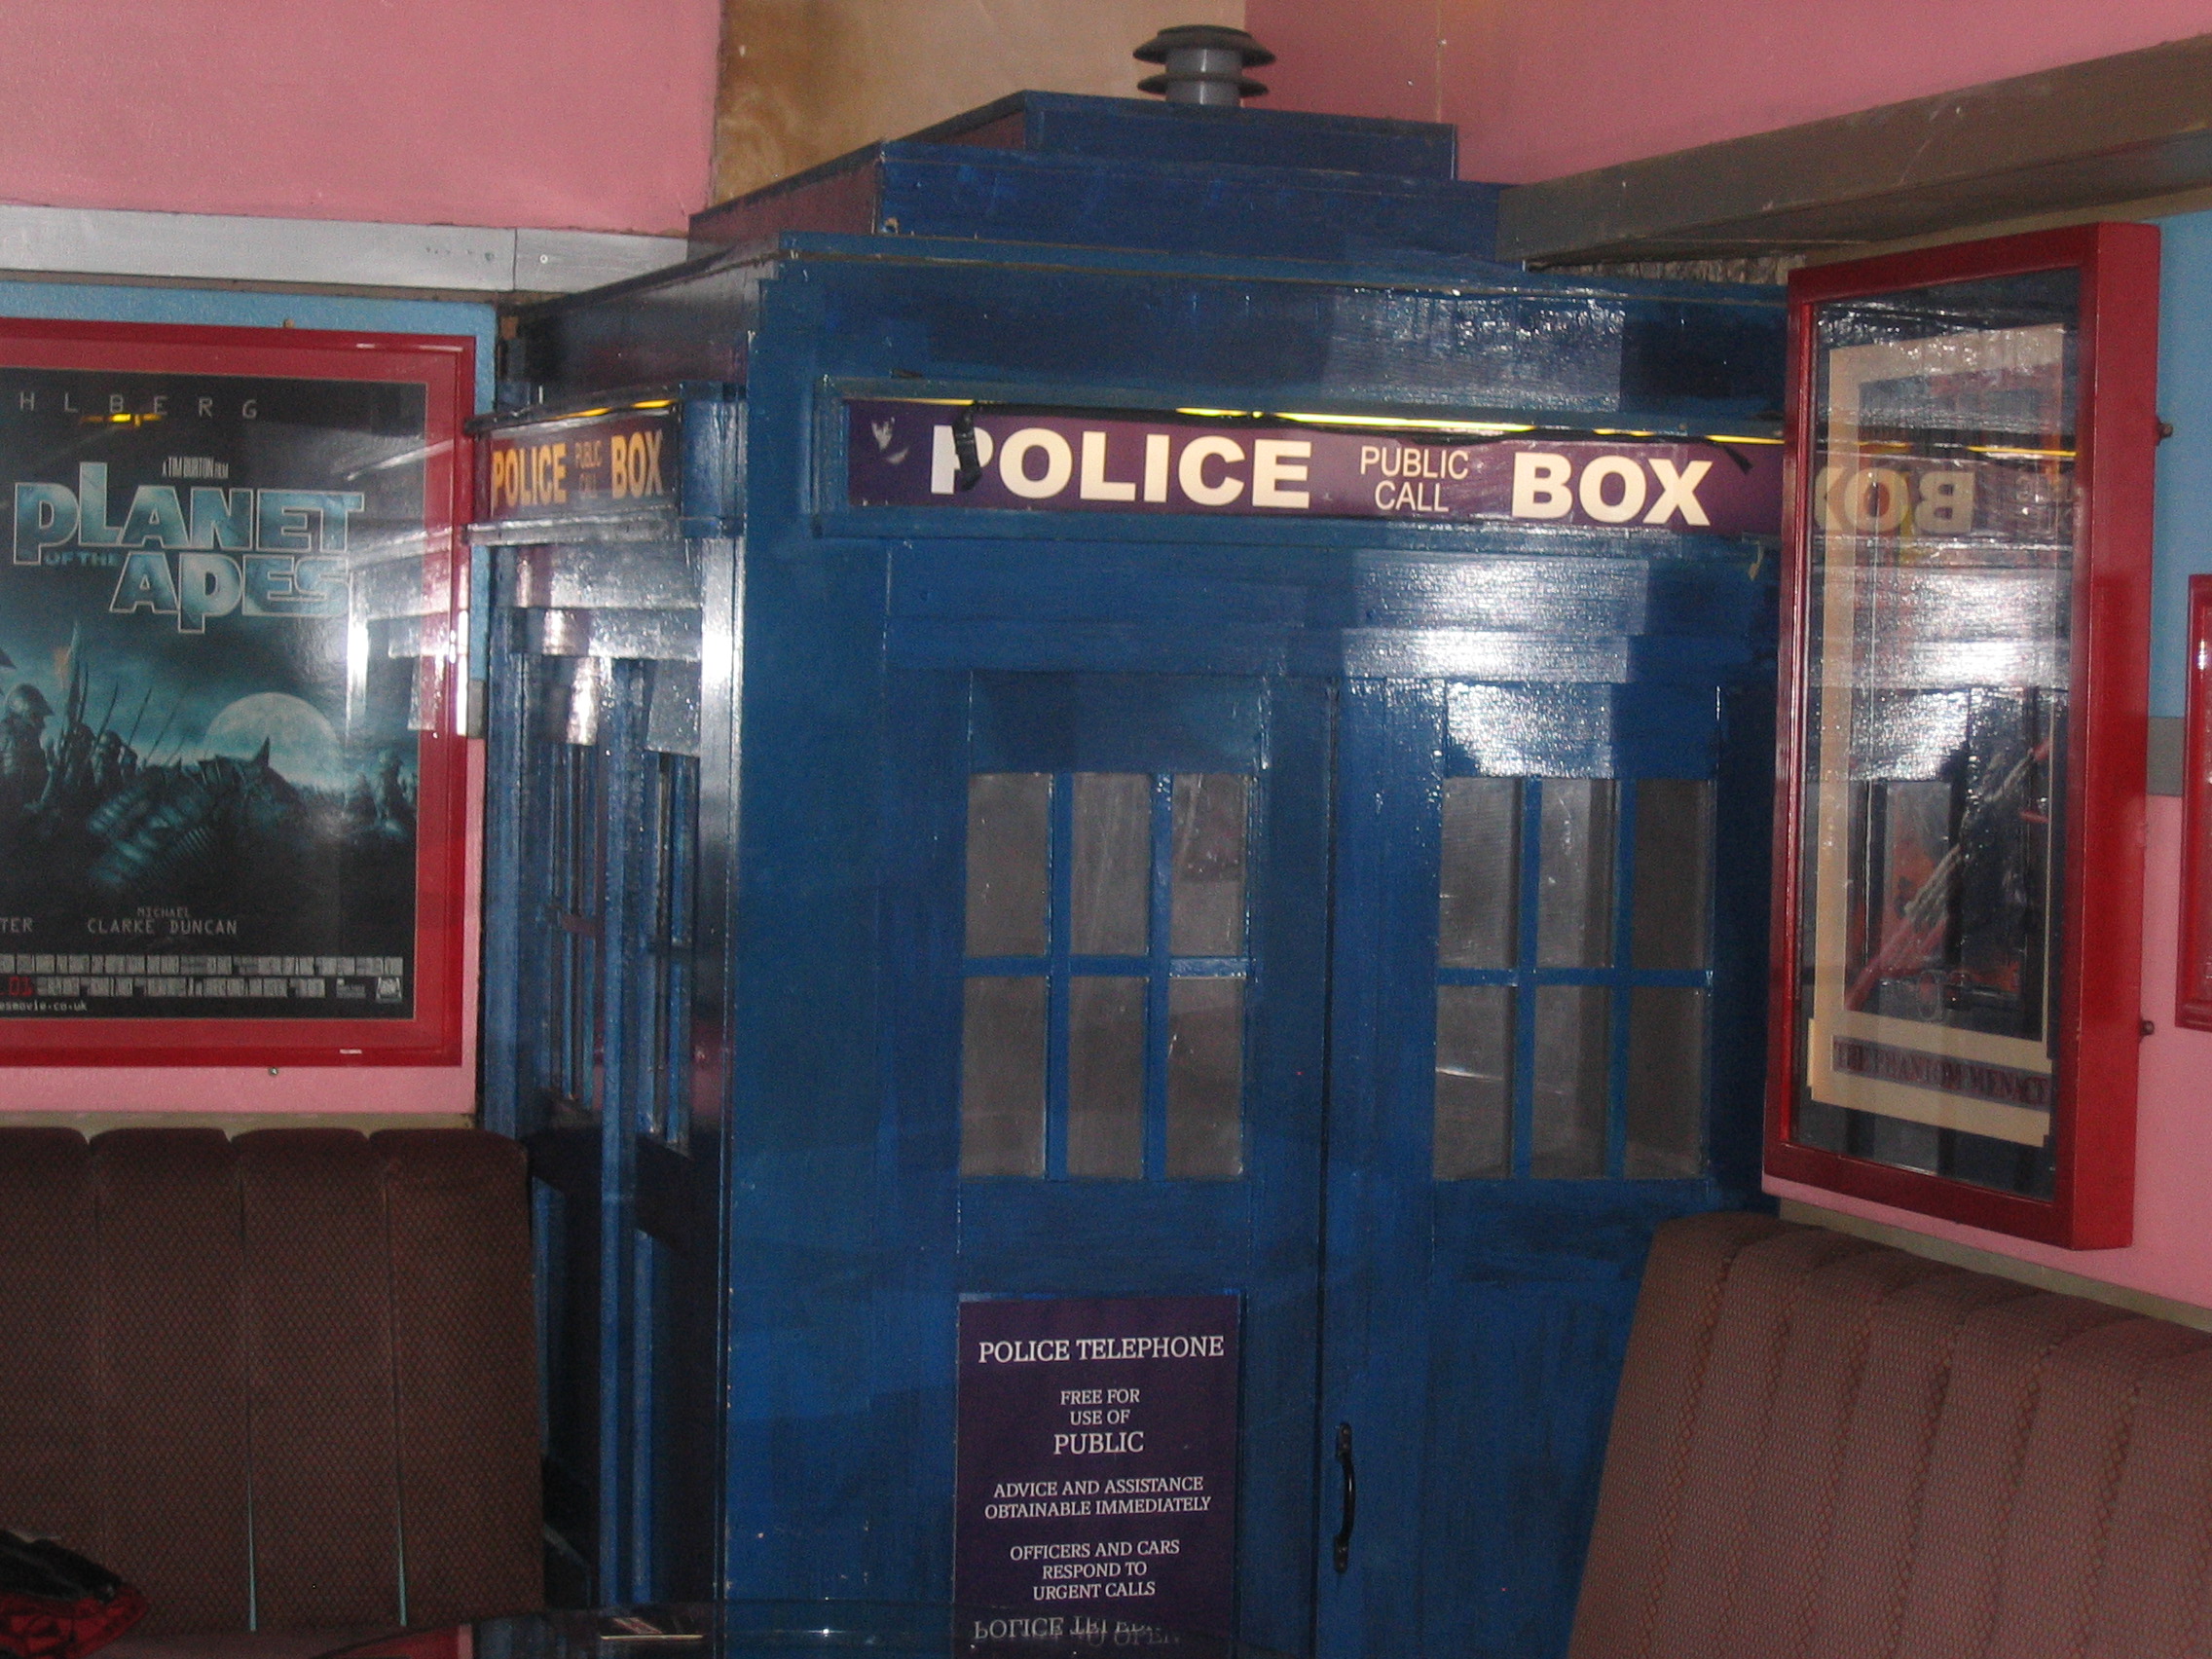  Photo taken by me – The Dr Who TARDIS in Manchester’s FAB Café 